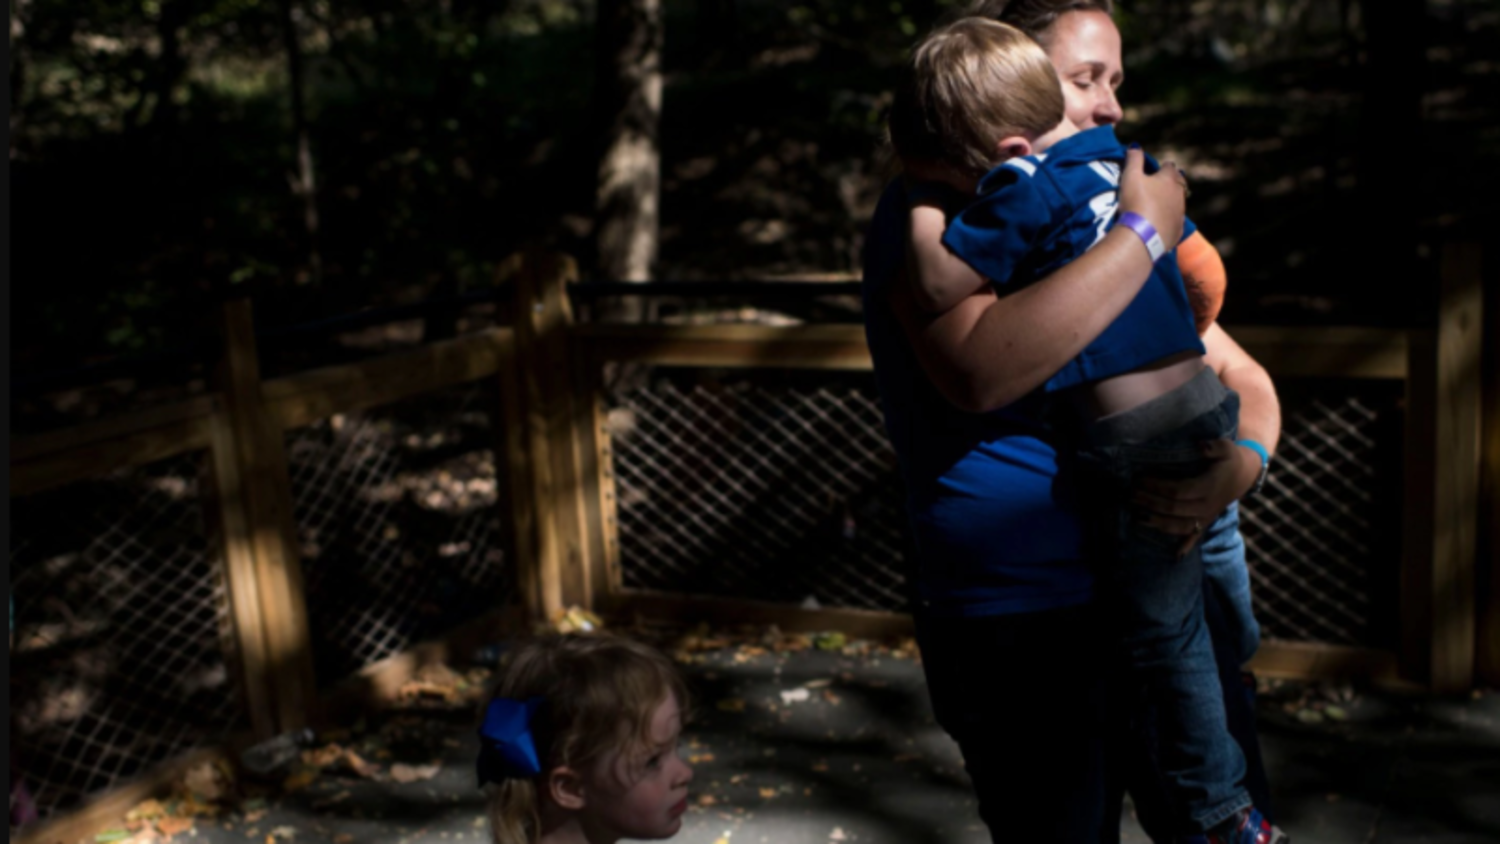 Alyssa, 3, walks by her mother, Julie Schlomer, as she comforts her twin brother, Logan, after he became upset about going down a slide at the Maryland Zoo in Baltimore during a special families event hosted by Shady Grove Fertility, the Rockville clinic that helped Schlomer have the children via a shared egg donor and in vitro fertilization. (Carolyn Van Houten/The Washington Post) 